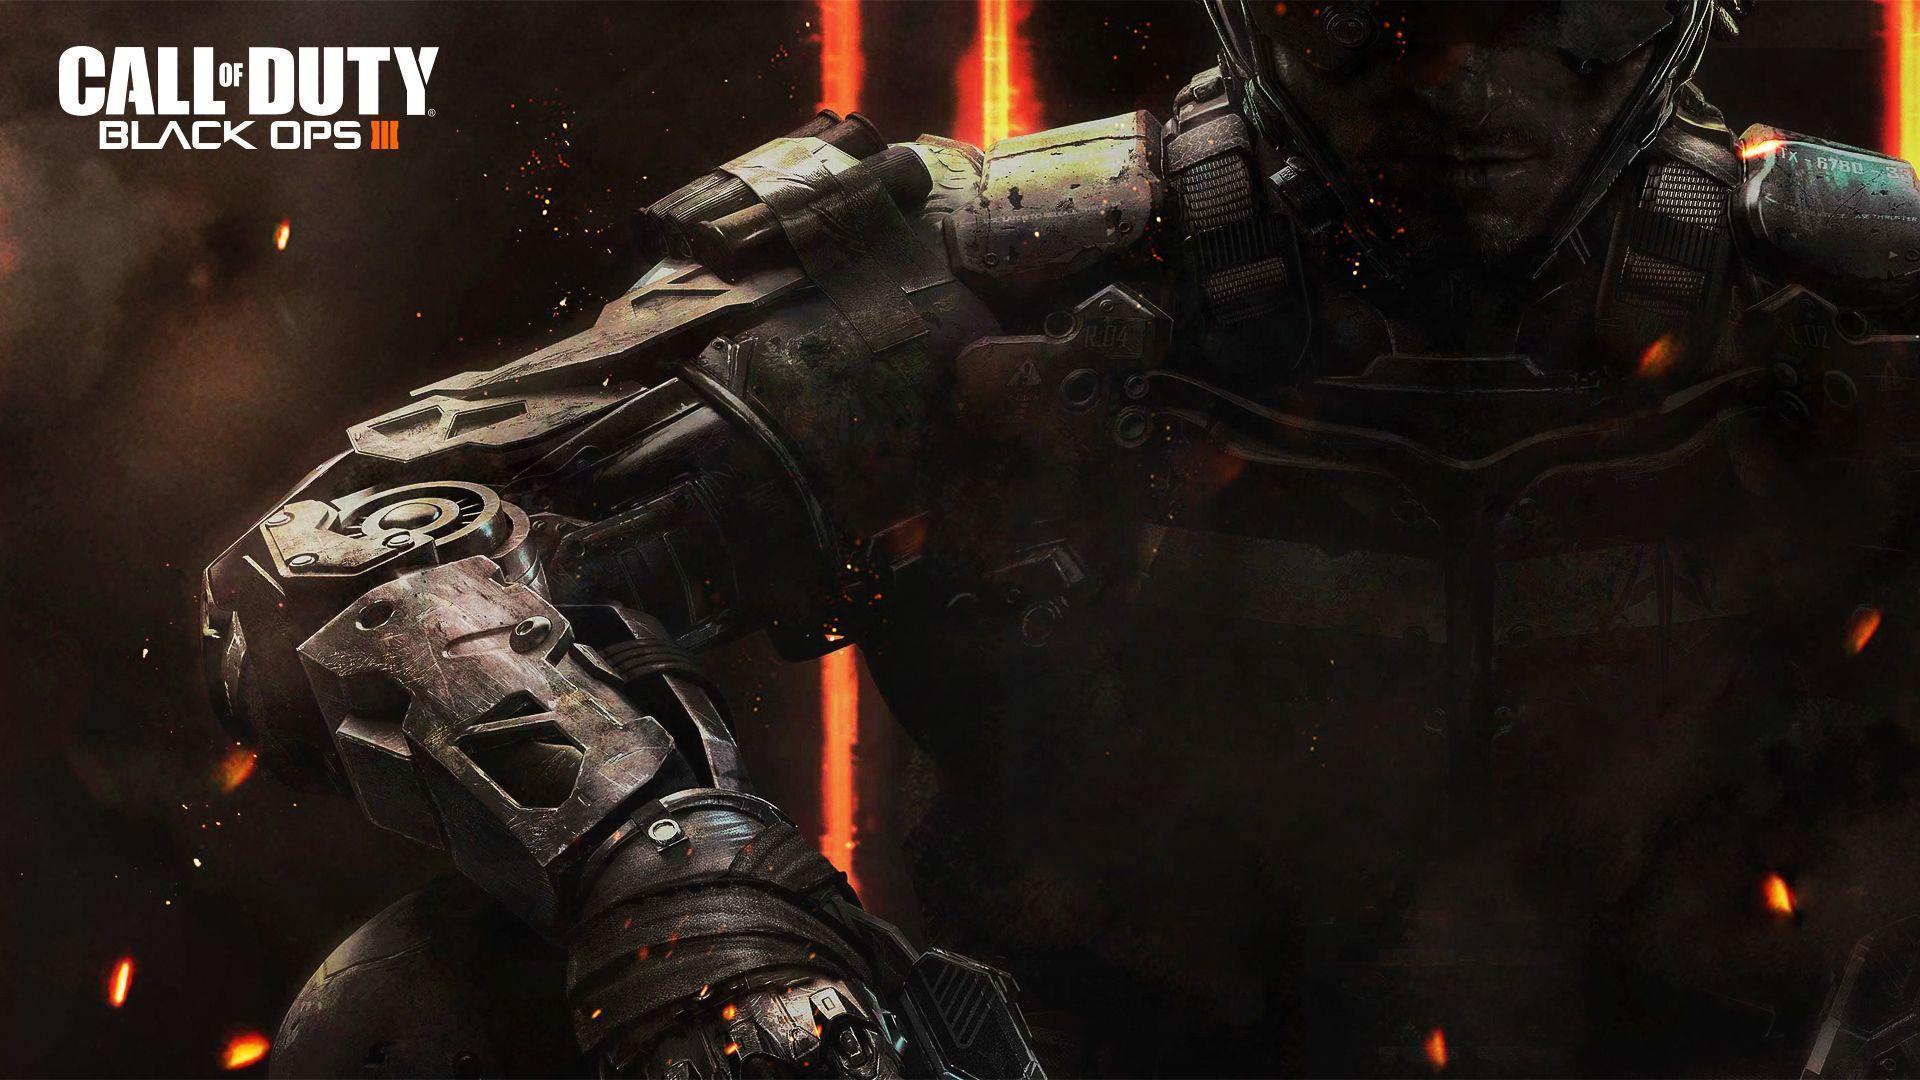 Black Ops 3 Wallpaper (BO3) Download Call of Duty